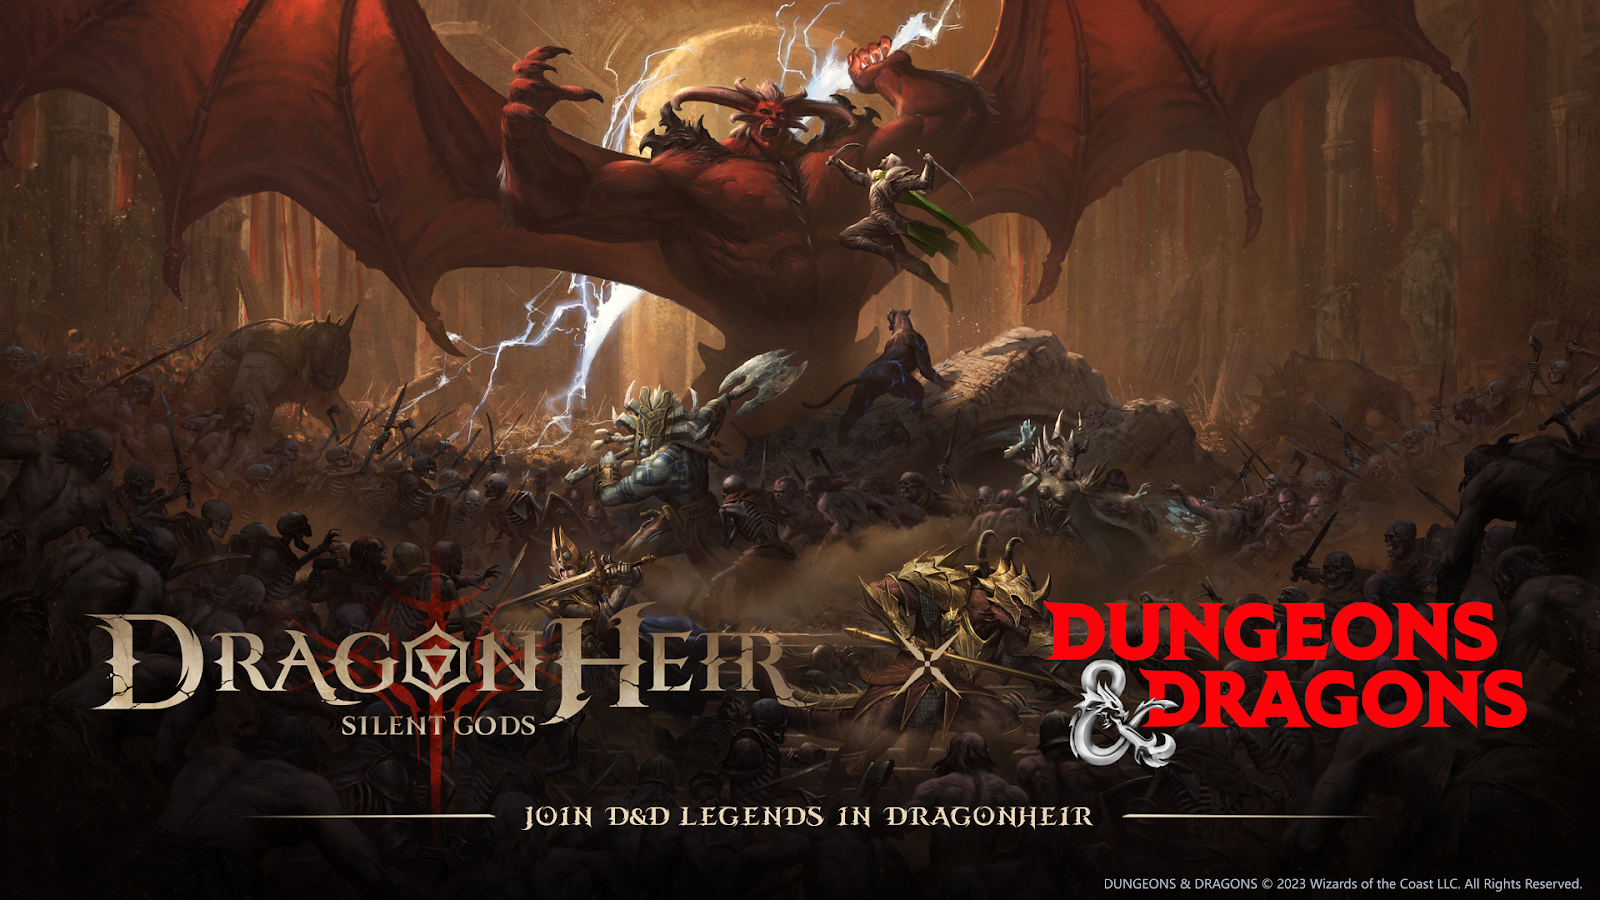 Upcoming DnD-style RPG Dragonheir gets even more Dungeons and Dragons